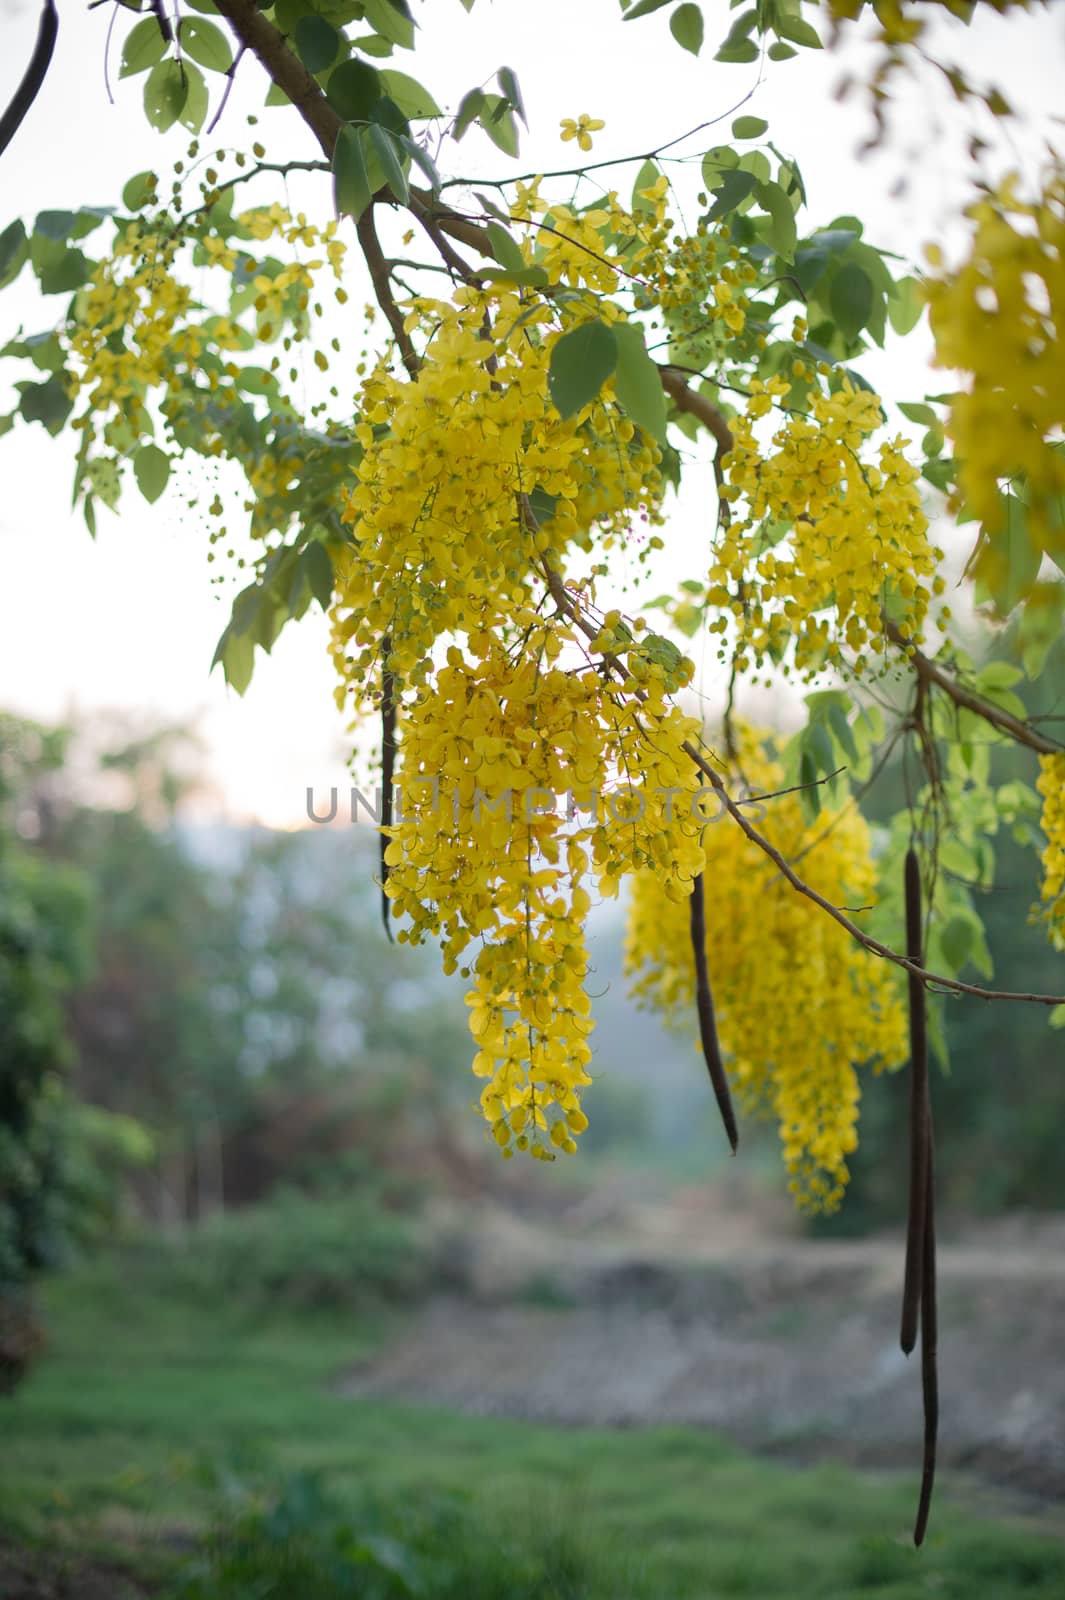 Closeup of yellow flower on tree branch